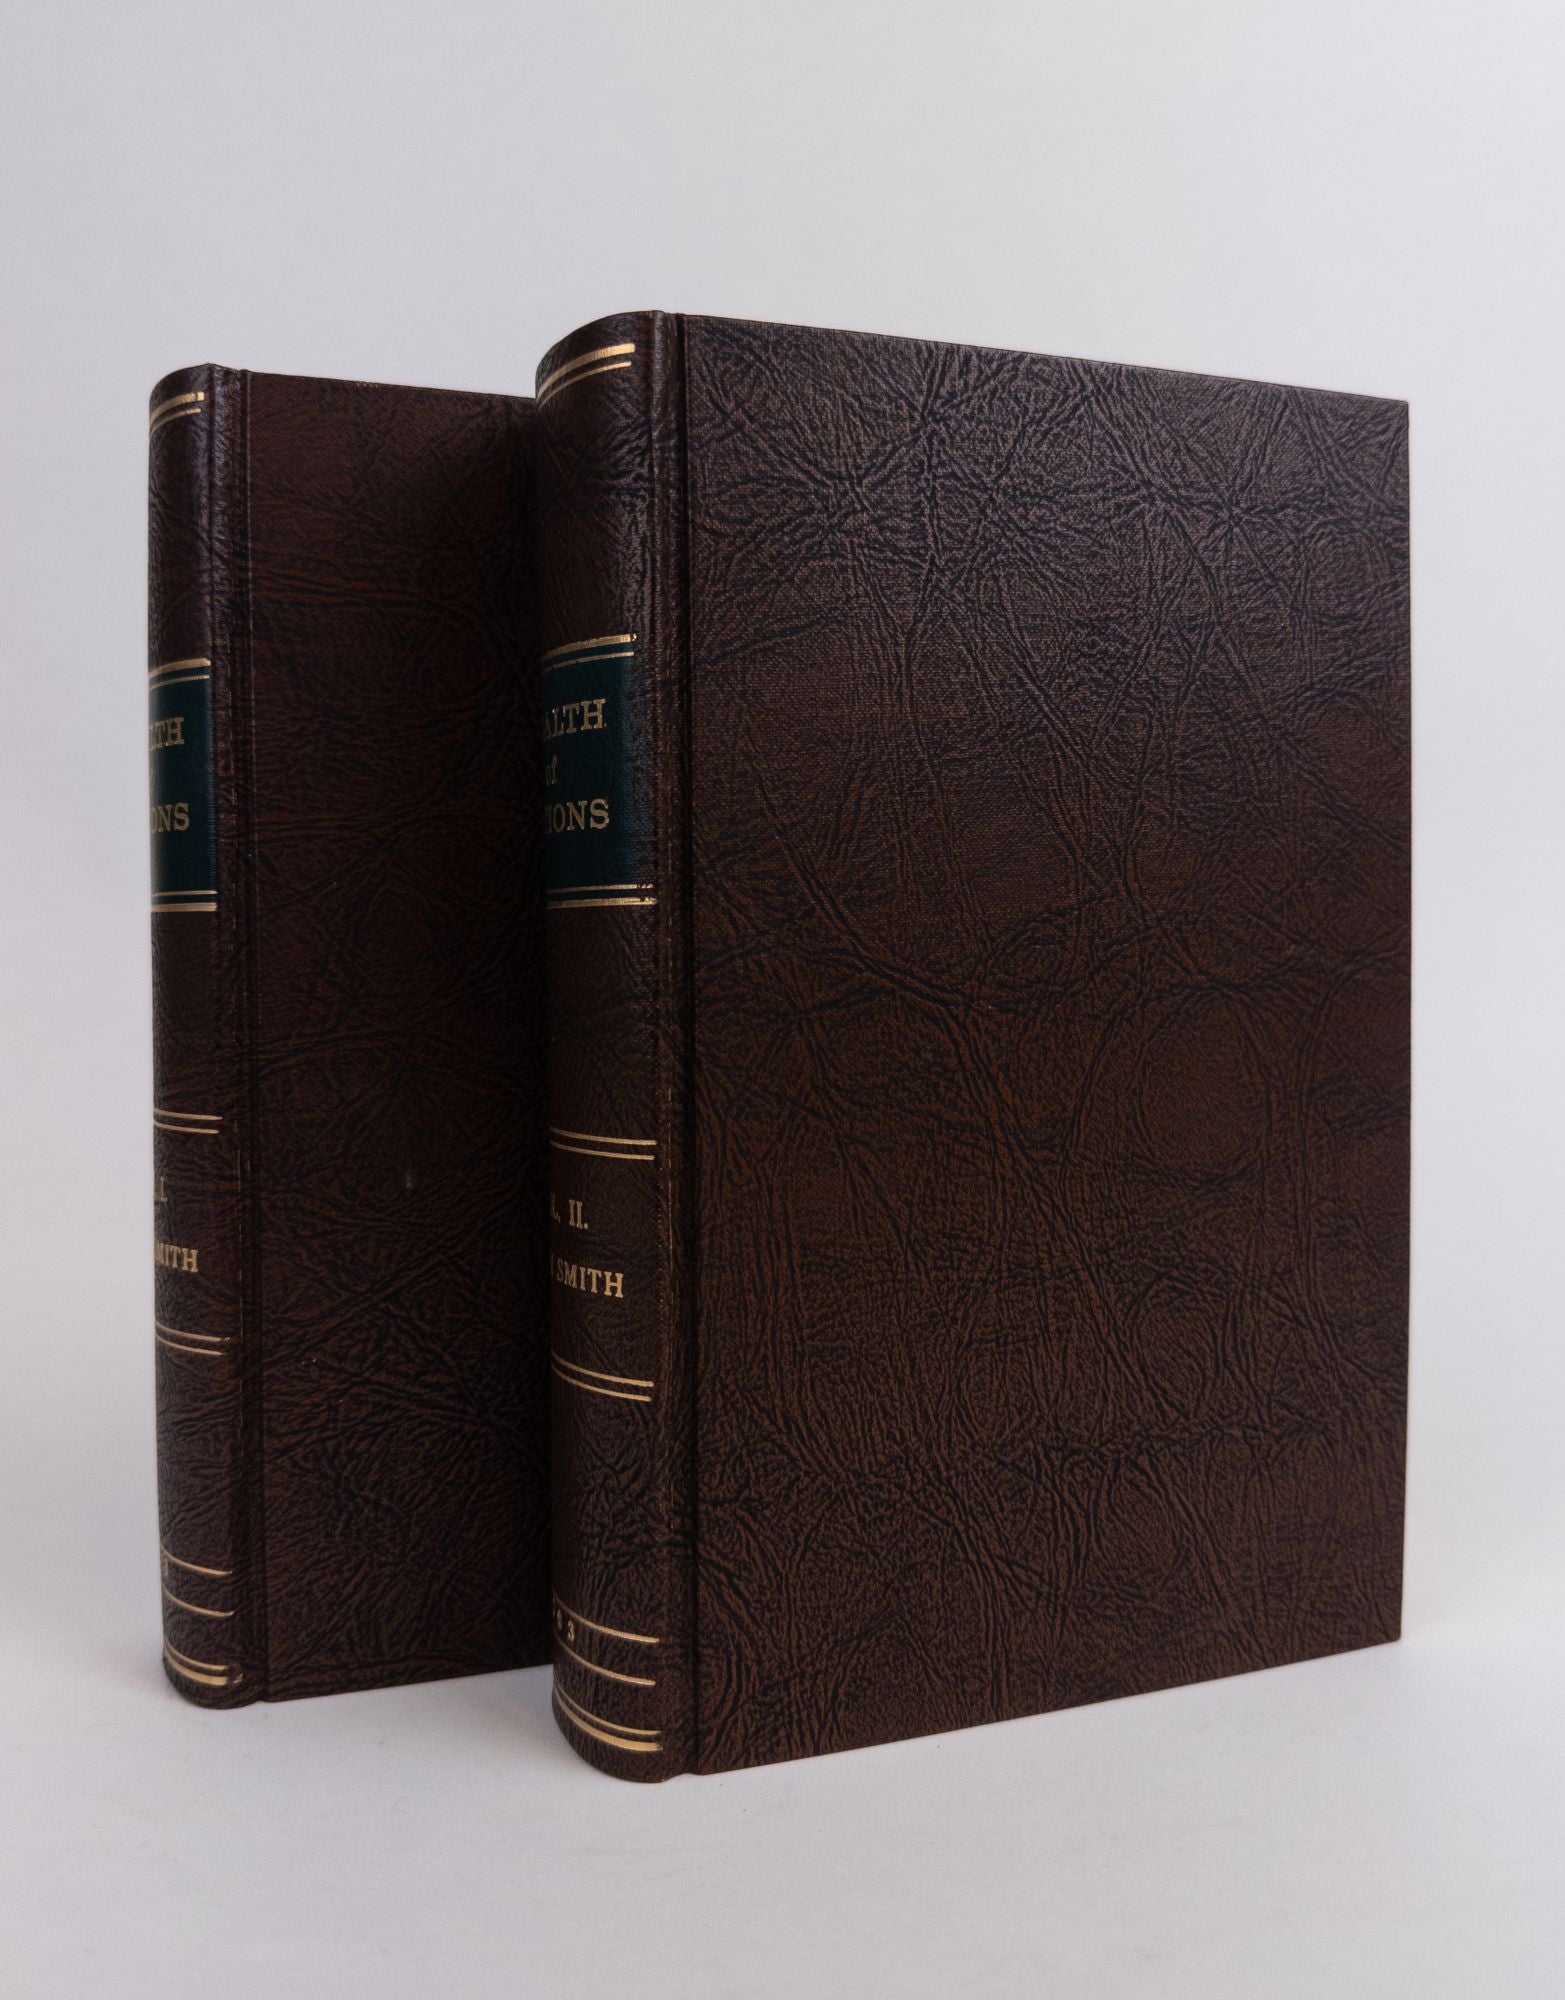 Product Image for AN INQUIRY INTO THE NATURE AND CAUSES OF THE WEALTH OF NATIONS [Two volumes]